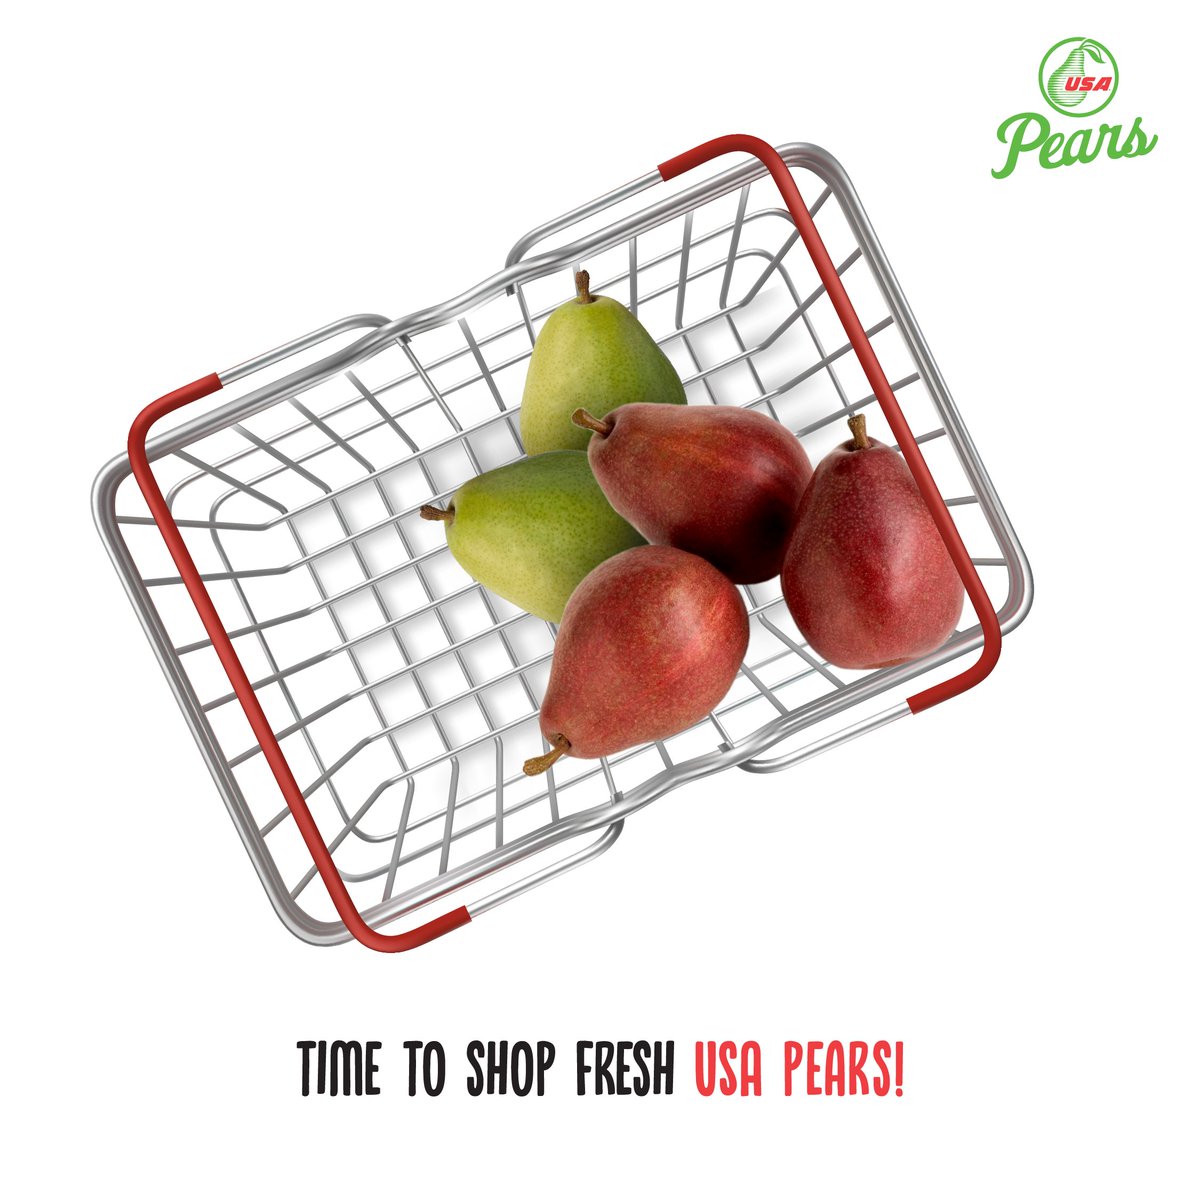 Adding fruits to your shopping cart?
Don't forget to include USA Pears on your list!

#USAPears #USAPearIndia #Pears #Fruit #Nutrition #HealthyChoices #ShoppingSmart #HealthyGrocery